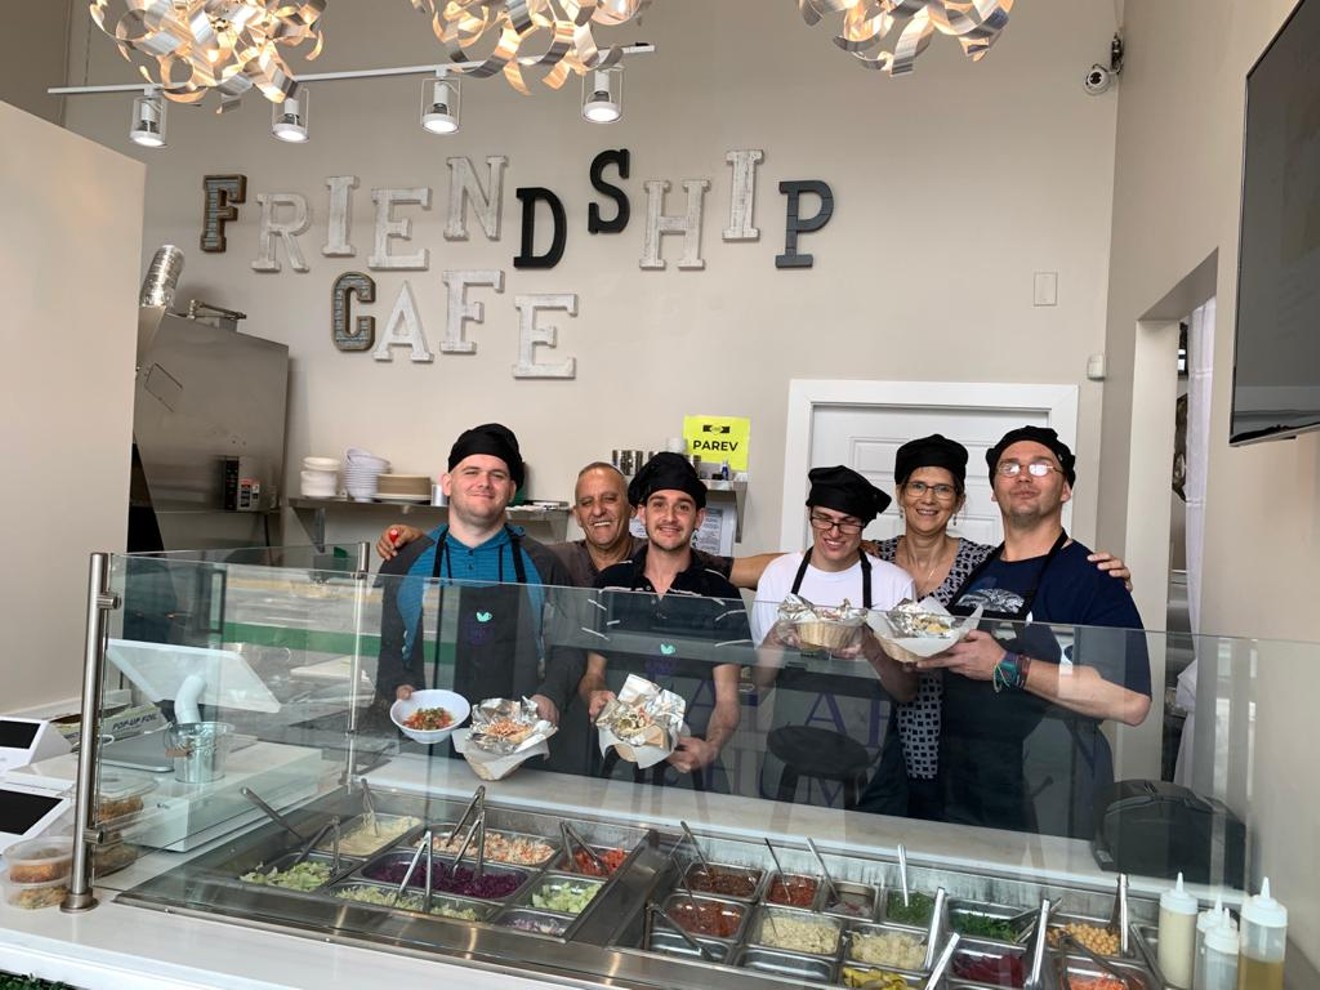 Friendship Café, which serves up Mediterranean fare, opens Wednesday in Fort Lauderdale.